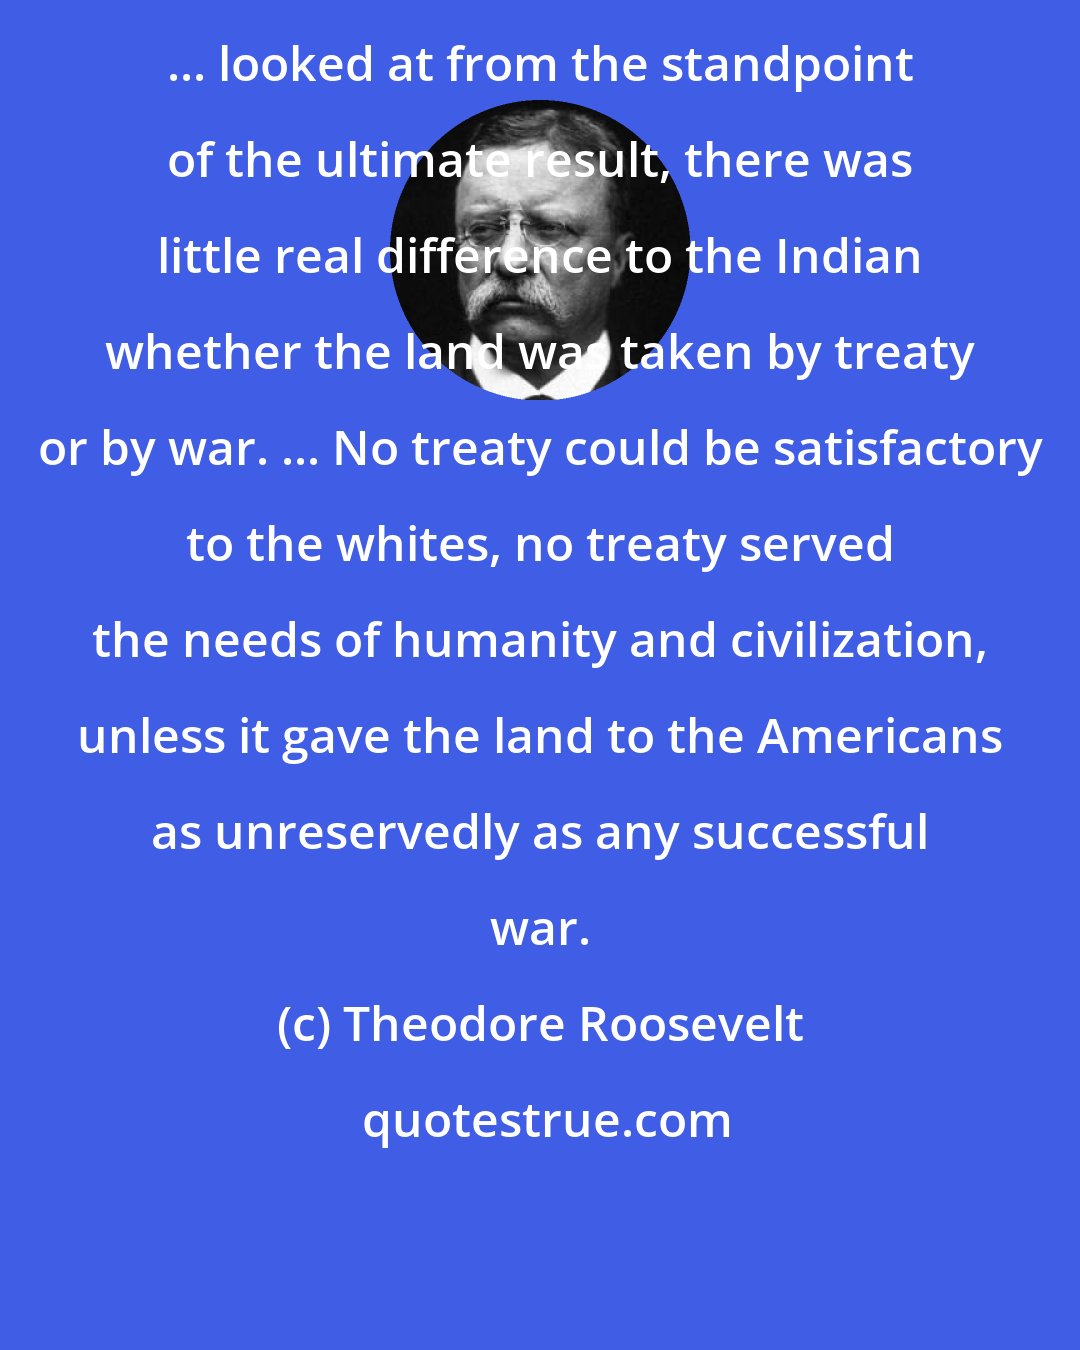 Theodore Roosevelt: ... looked at from the standpoint of the ultimate result, there was little real difference to the Indian whether the land was taken by treaty or by war. ... No treaty could be satisfactory to the whites, no treaty served the needs of humanity and civilization, unless it gave the land to the Americans as unreservedly as any successful war.